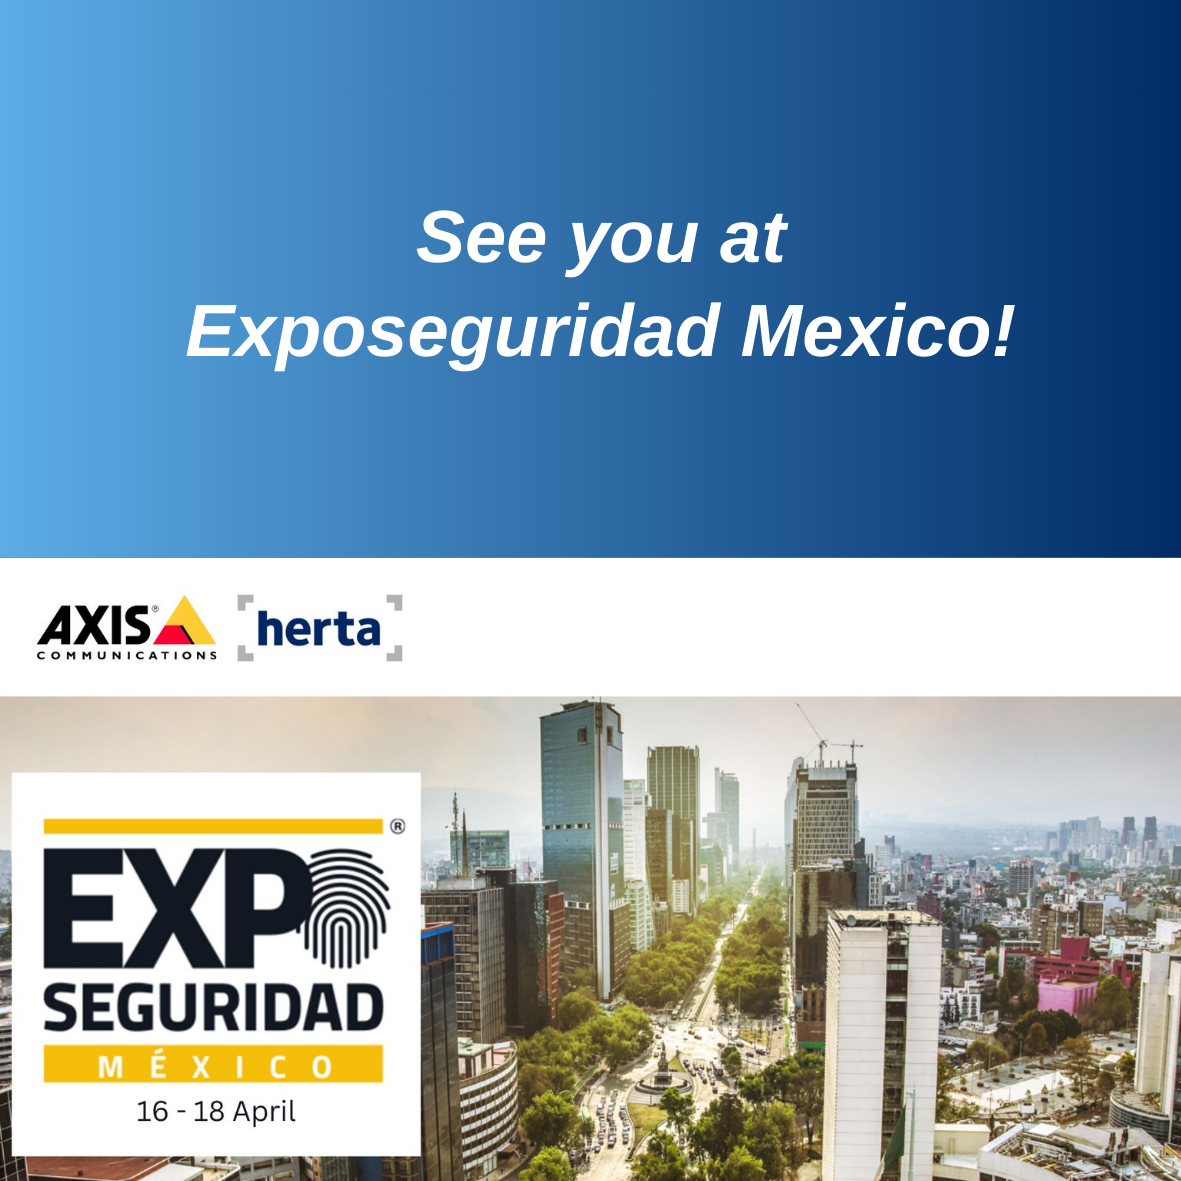 Herta joins Axis to present its innovative solutions at Exposeguro México